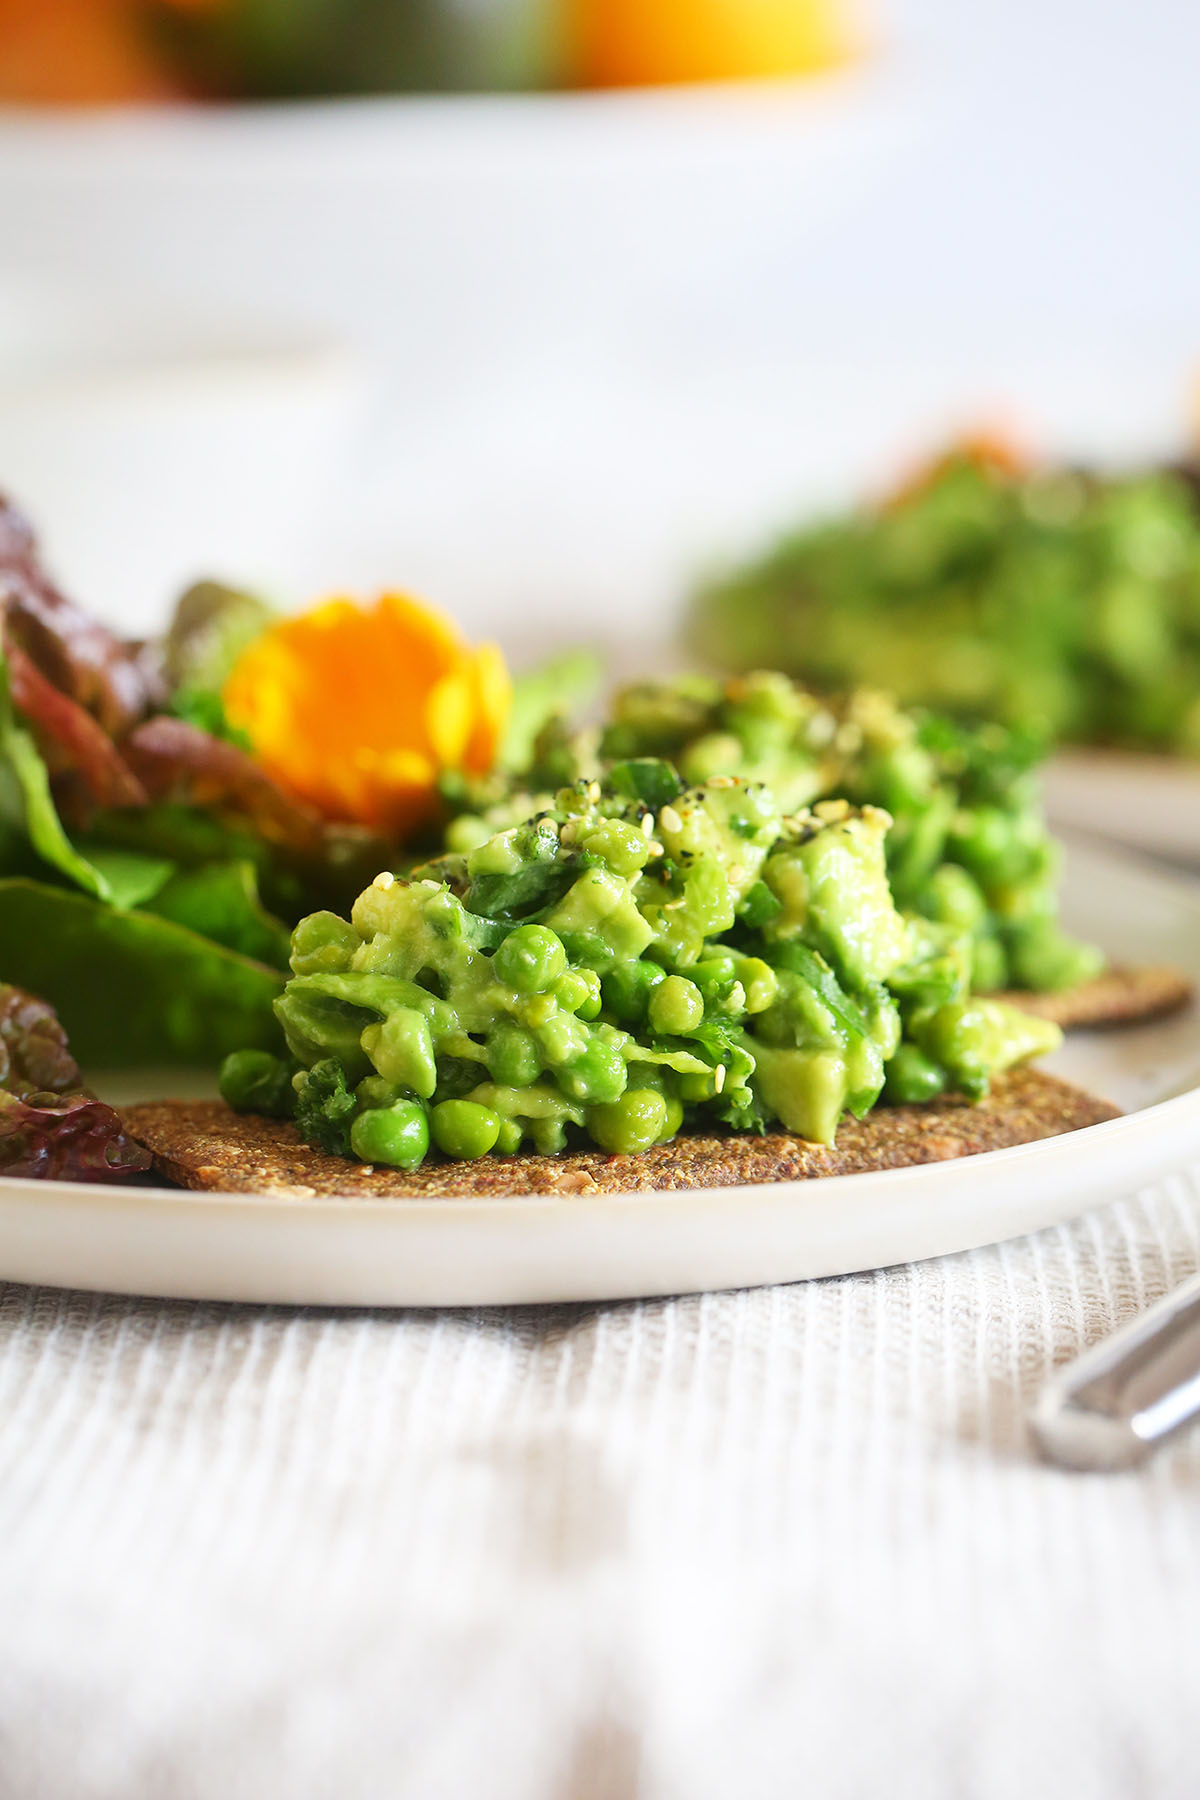 The best ever AVOCADO AND PEA SMASH! - easy, 10 minutes, vegan, plant based, dairy free, healthy, gluten free, lunch, snack, recipe, begoodorganics 1